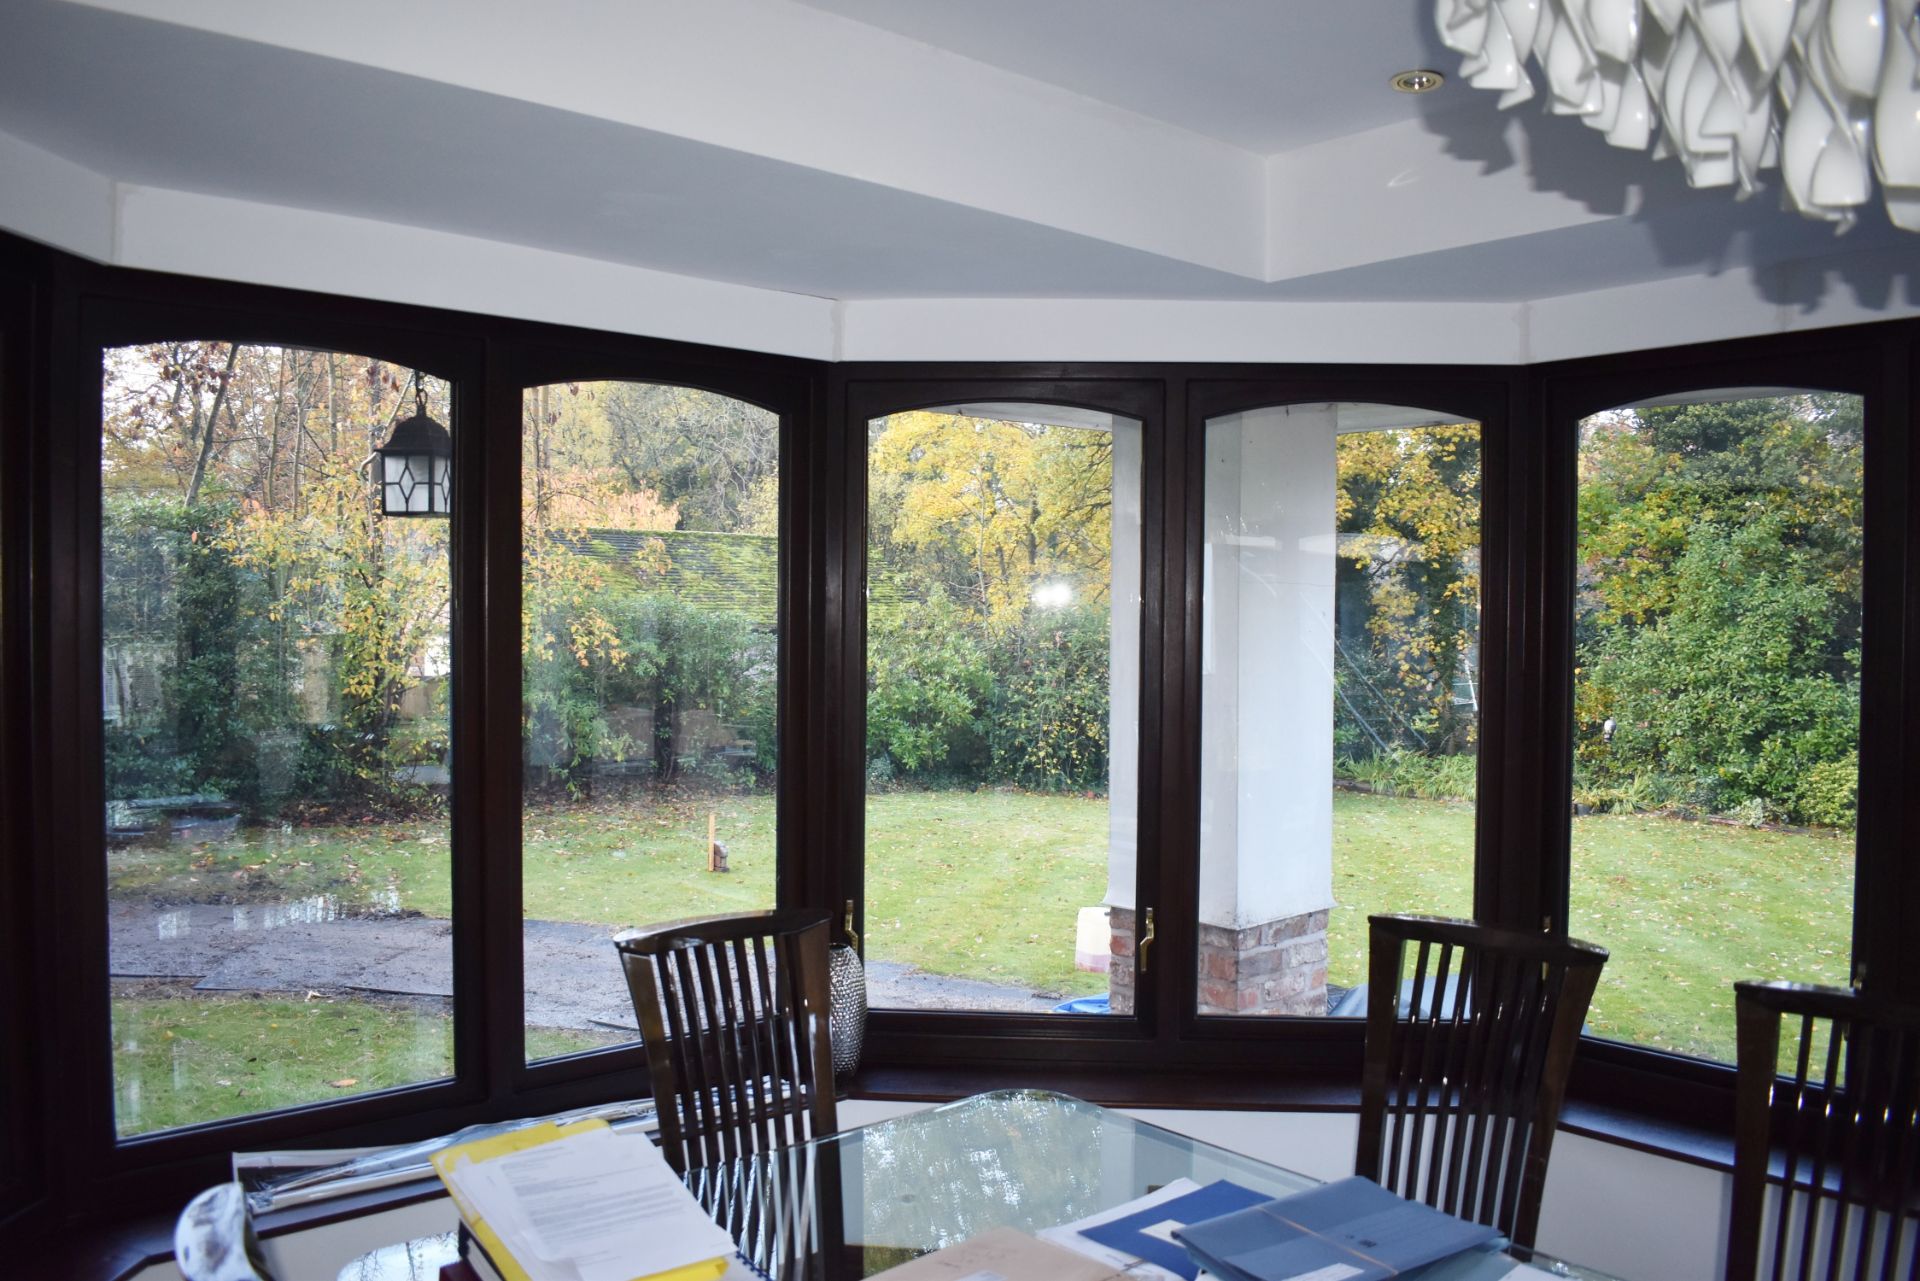 Selection of Hardwood Double Glazed Conservatory Windows and French Doors - Fitted With Darbytuf - Image 8 of 9